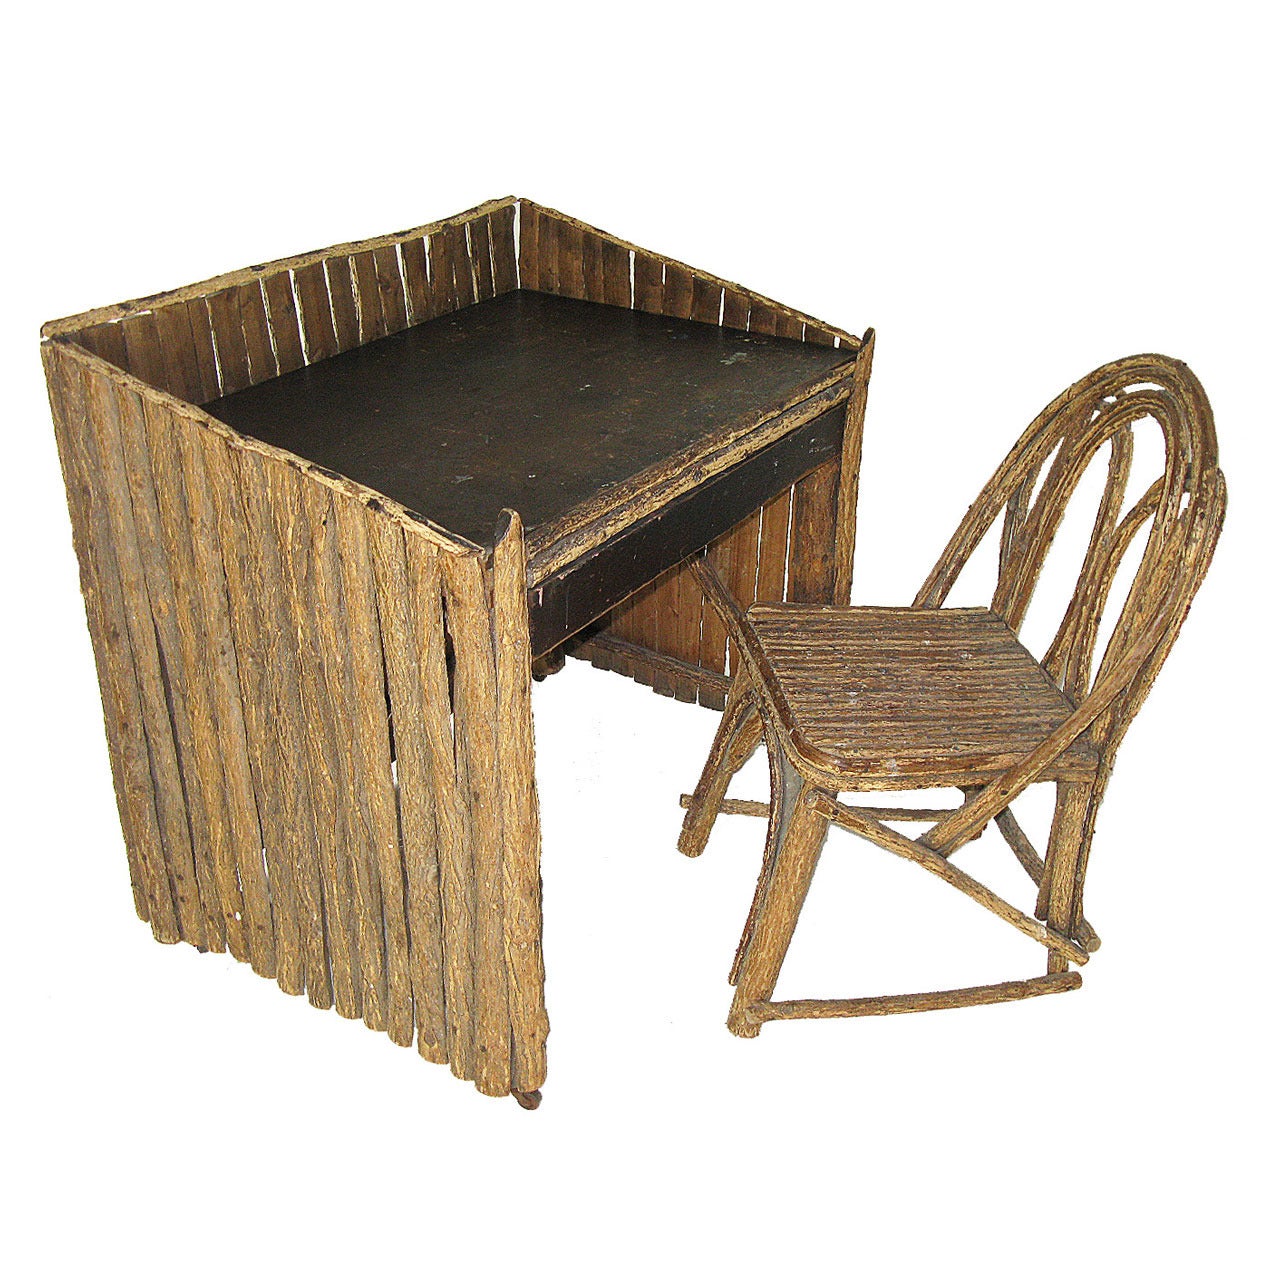 Adirondack Rustic Desk with Twig Chair For Sale